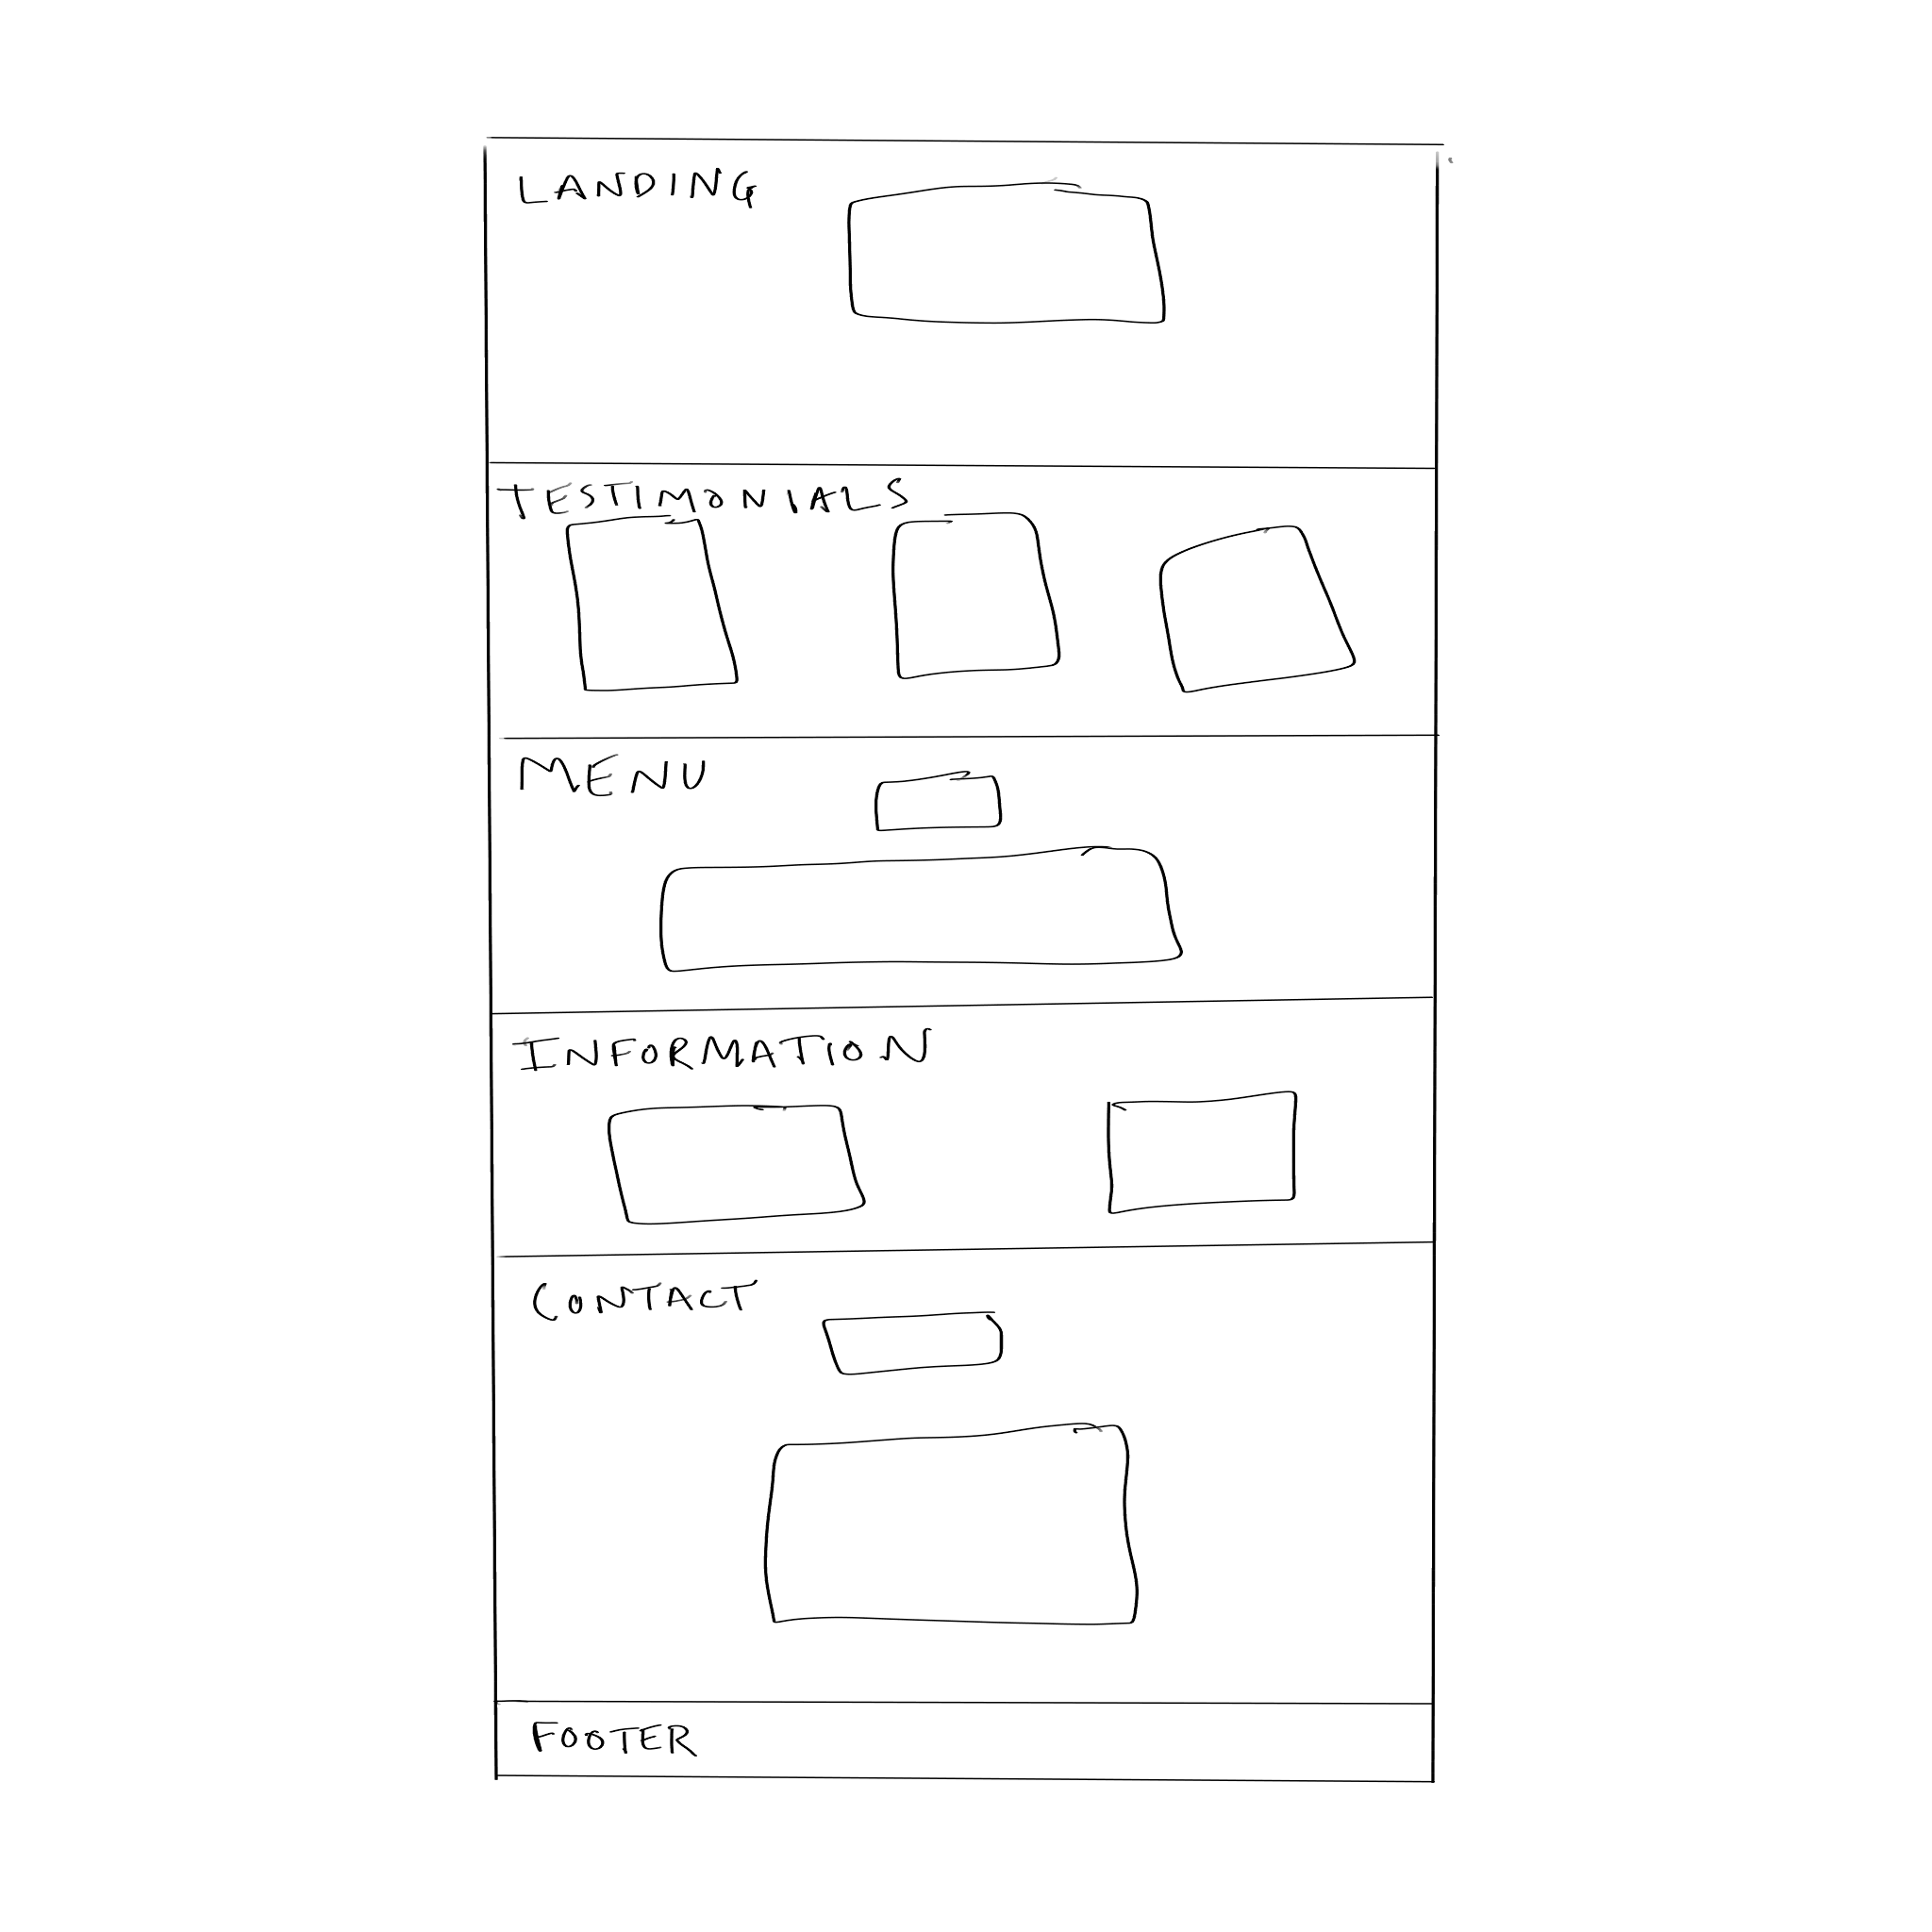 Boxes in boxes in boxes. This is how you should think about HTML layouts.